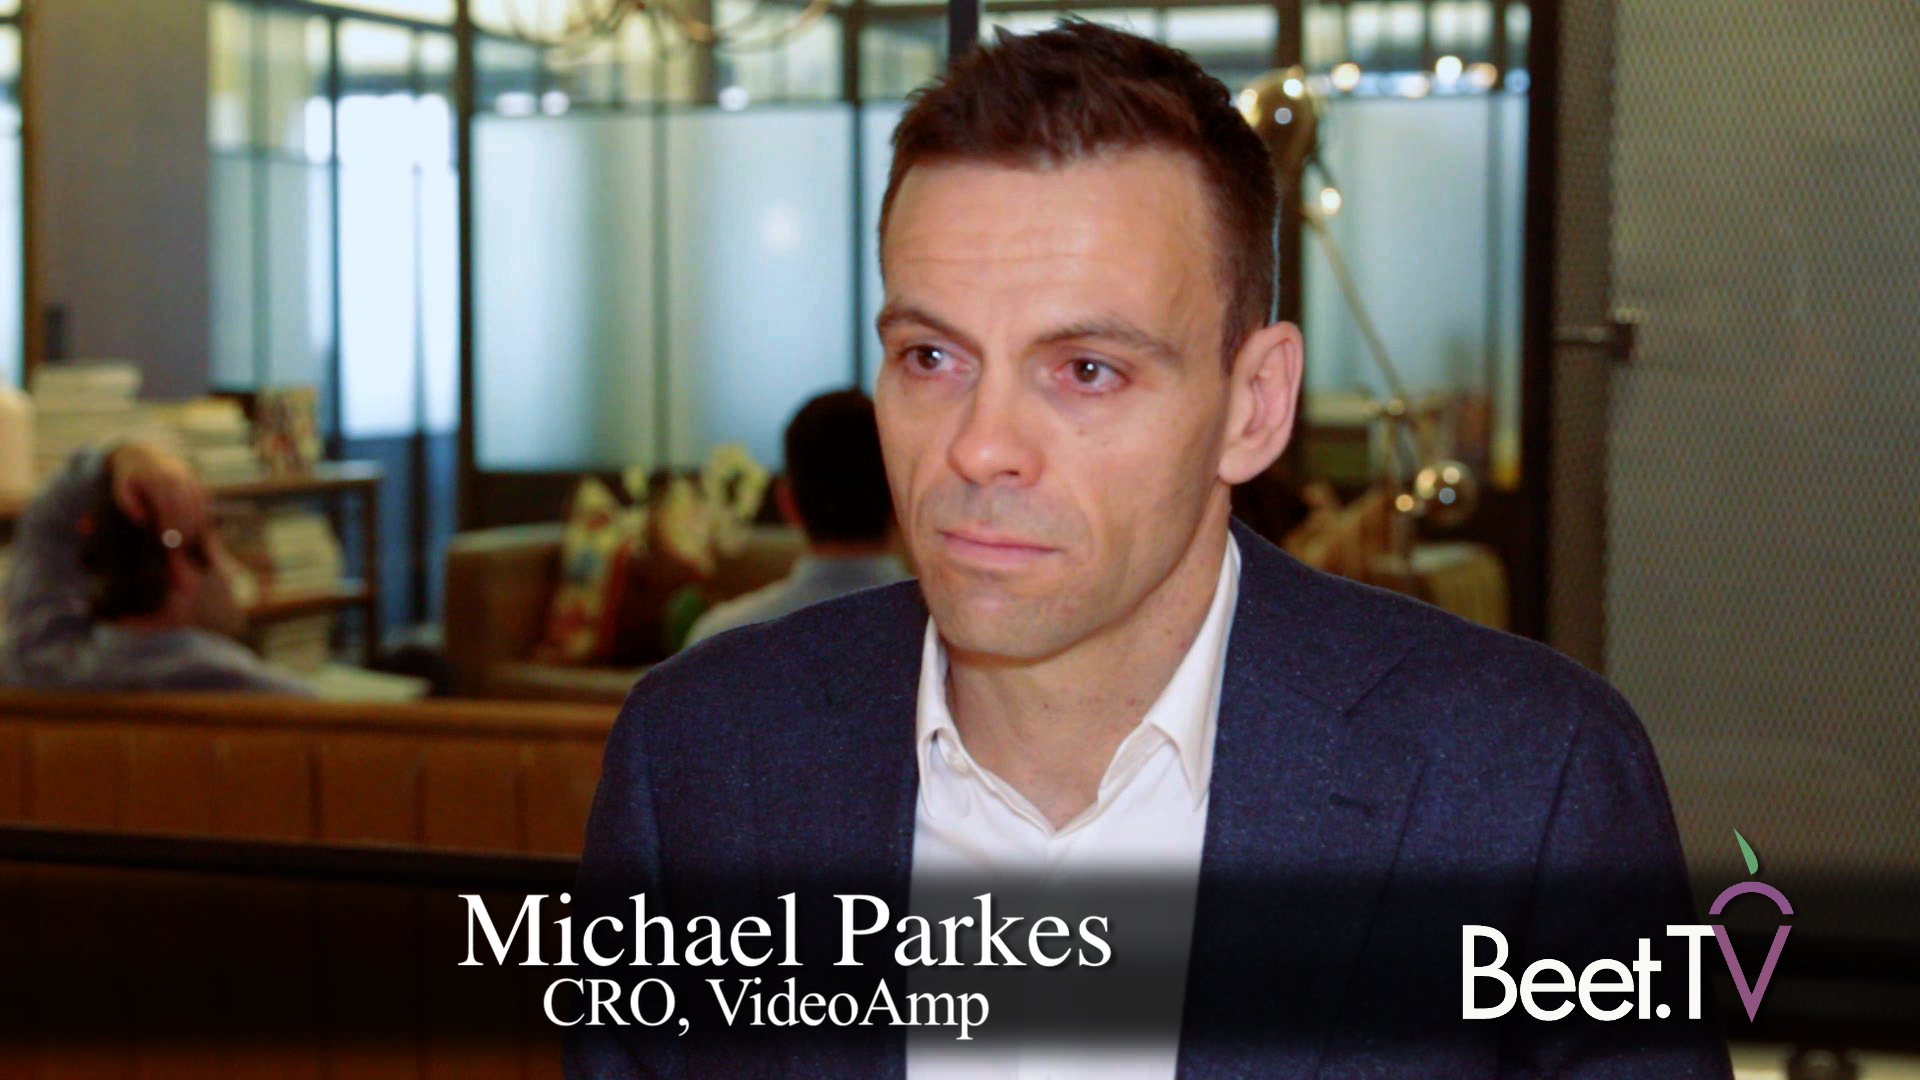 VideoAmp Commingles ACR & STB Data To Unify TV Buying: Parkes